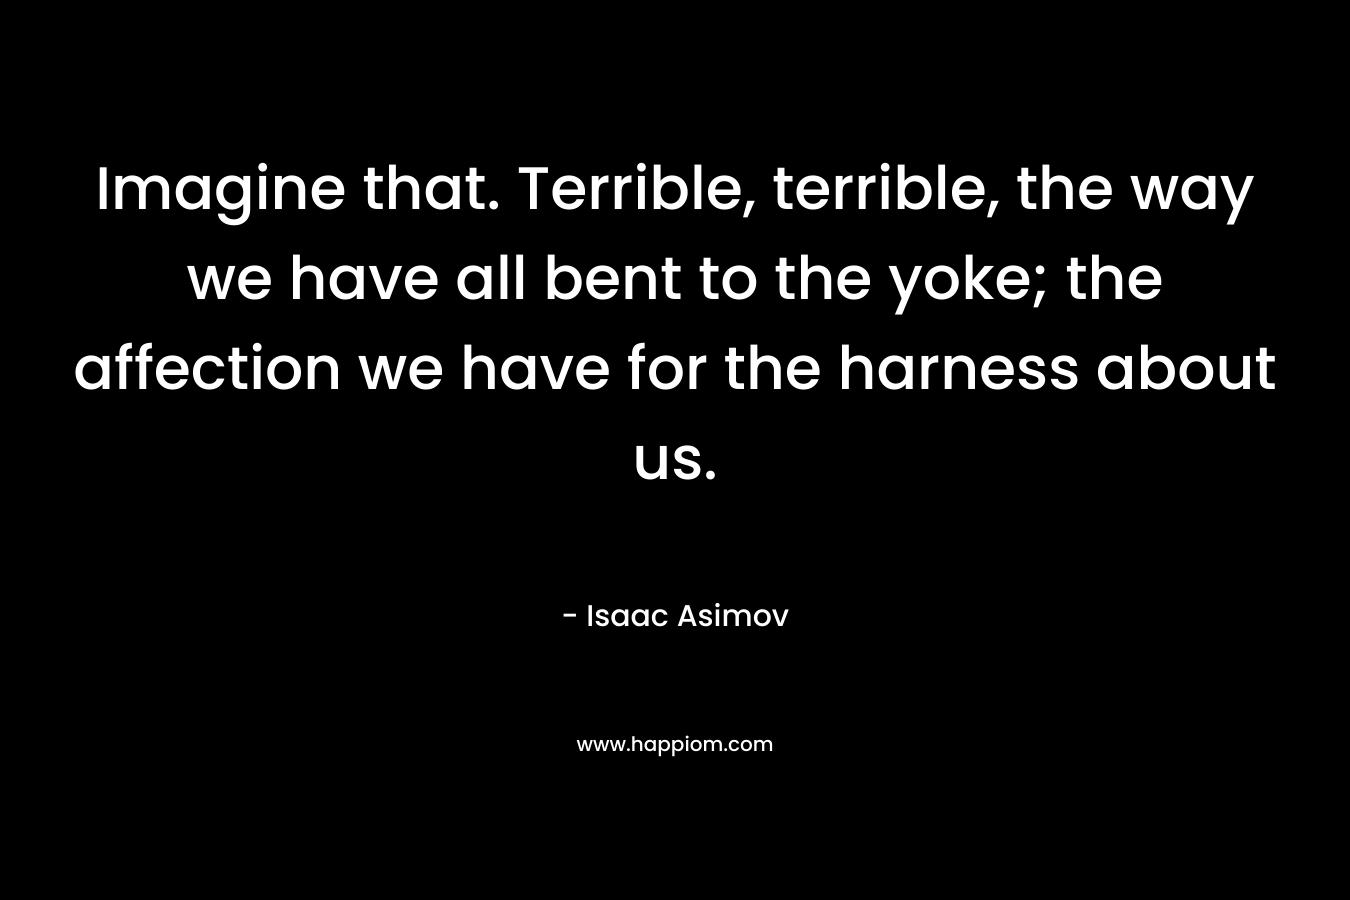 Imagine that. Terrible, terrible, the way we have all bent to the yoke; the affection we have for the harness about us.